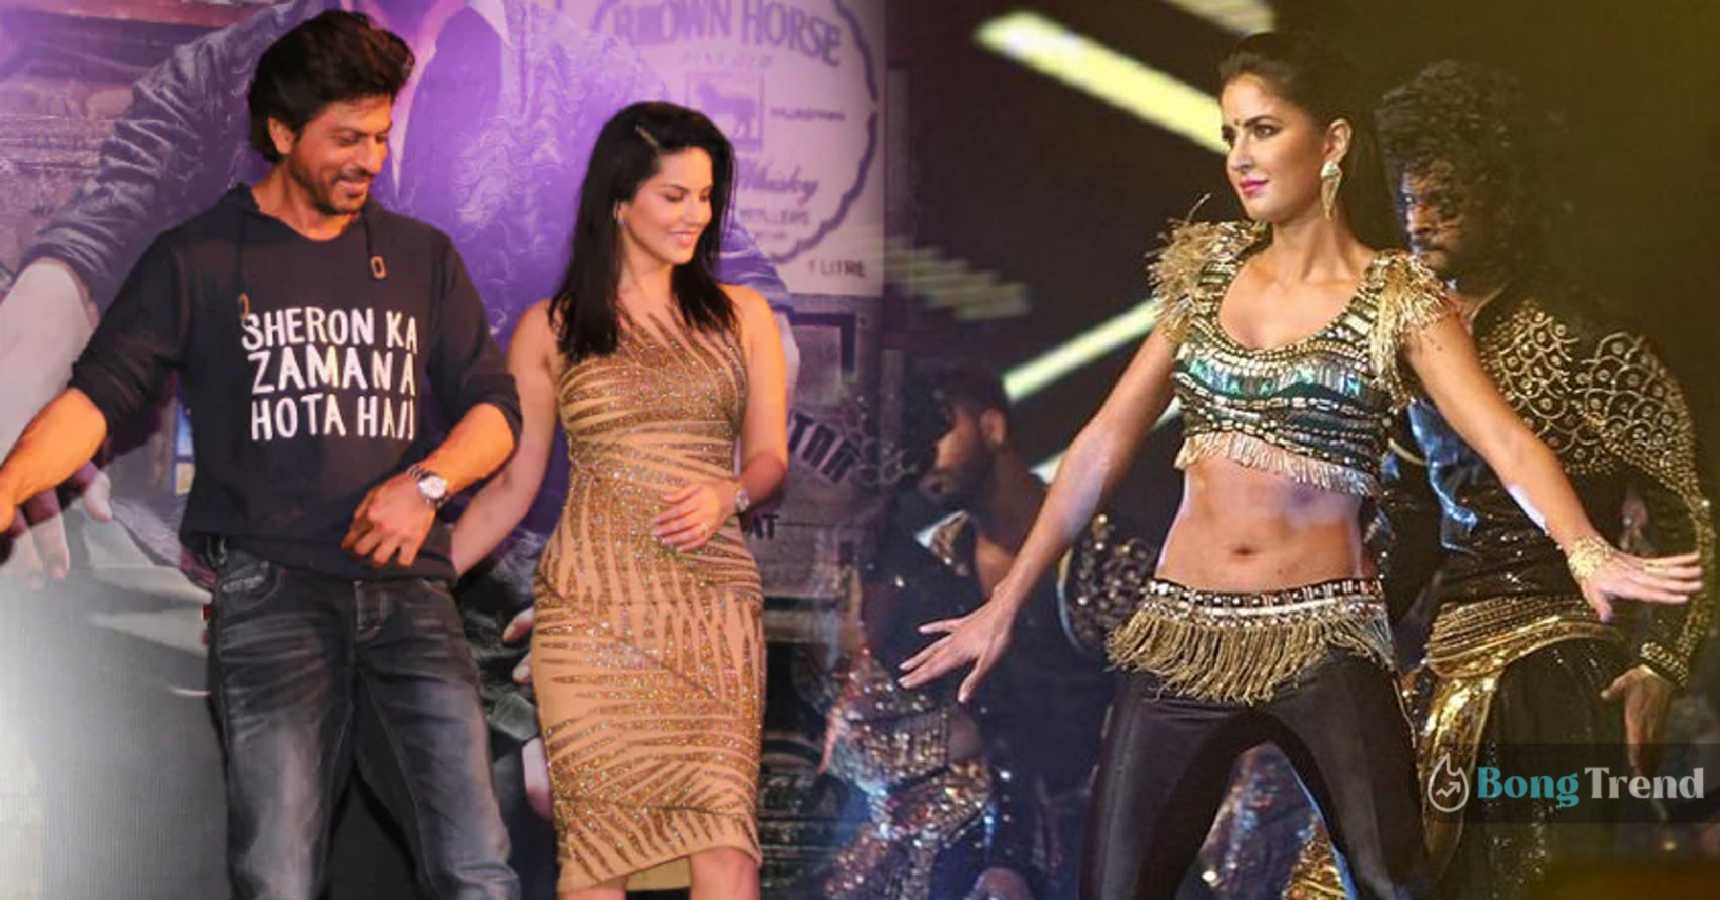 Shahrukh Khan to Sunny Leone bollywood stars dancing in wedding for whooping amounts